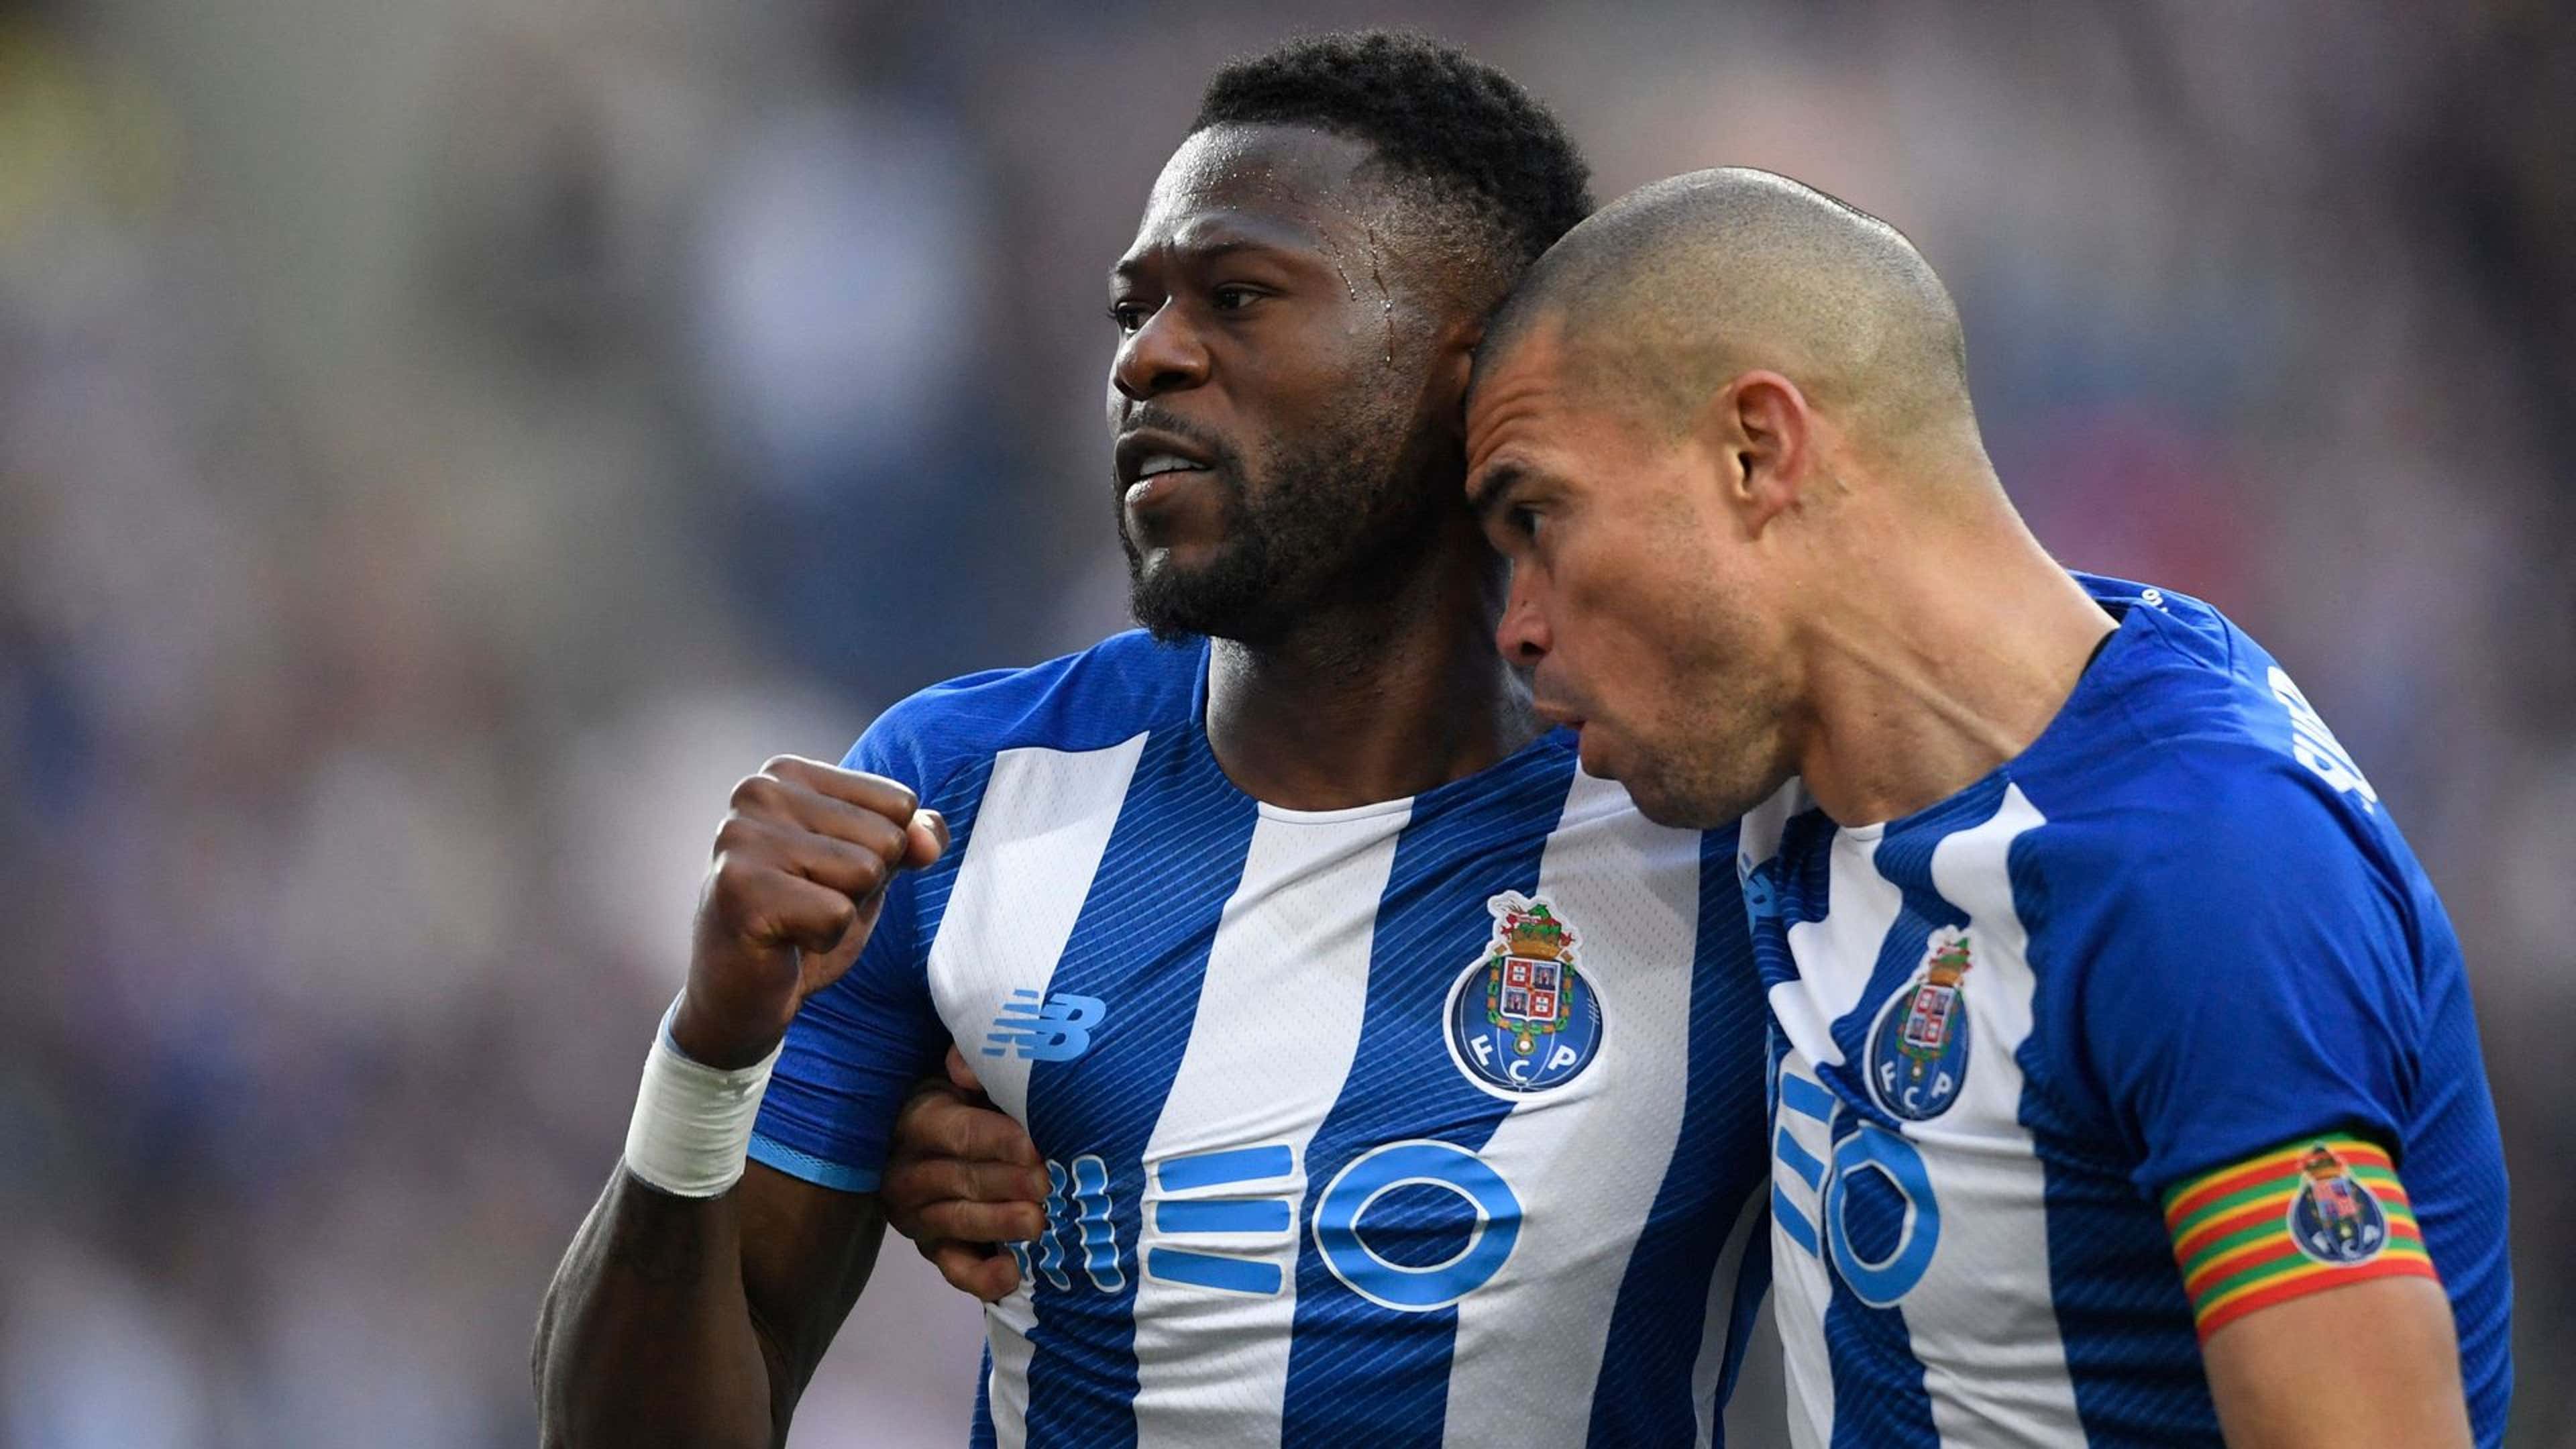 Sanusi and Mbemba win Portuguese Cup with FC Porto